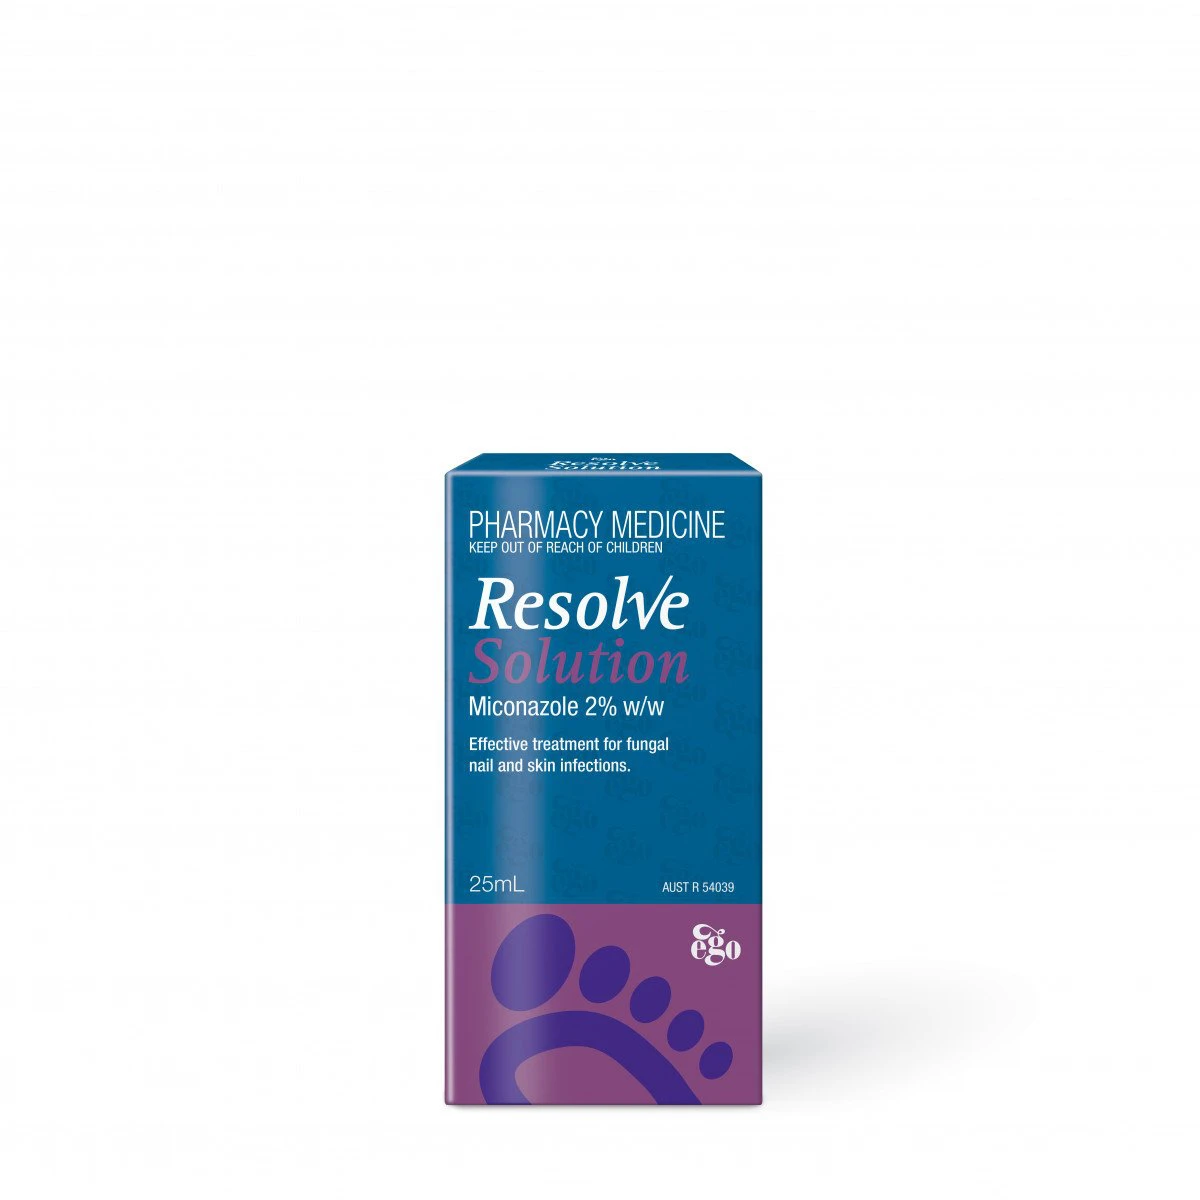 resolve solotion miconazole for fungal nail and skin infections